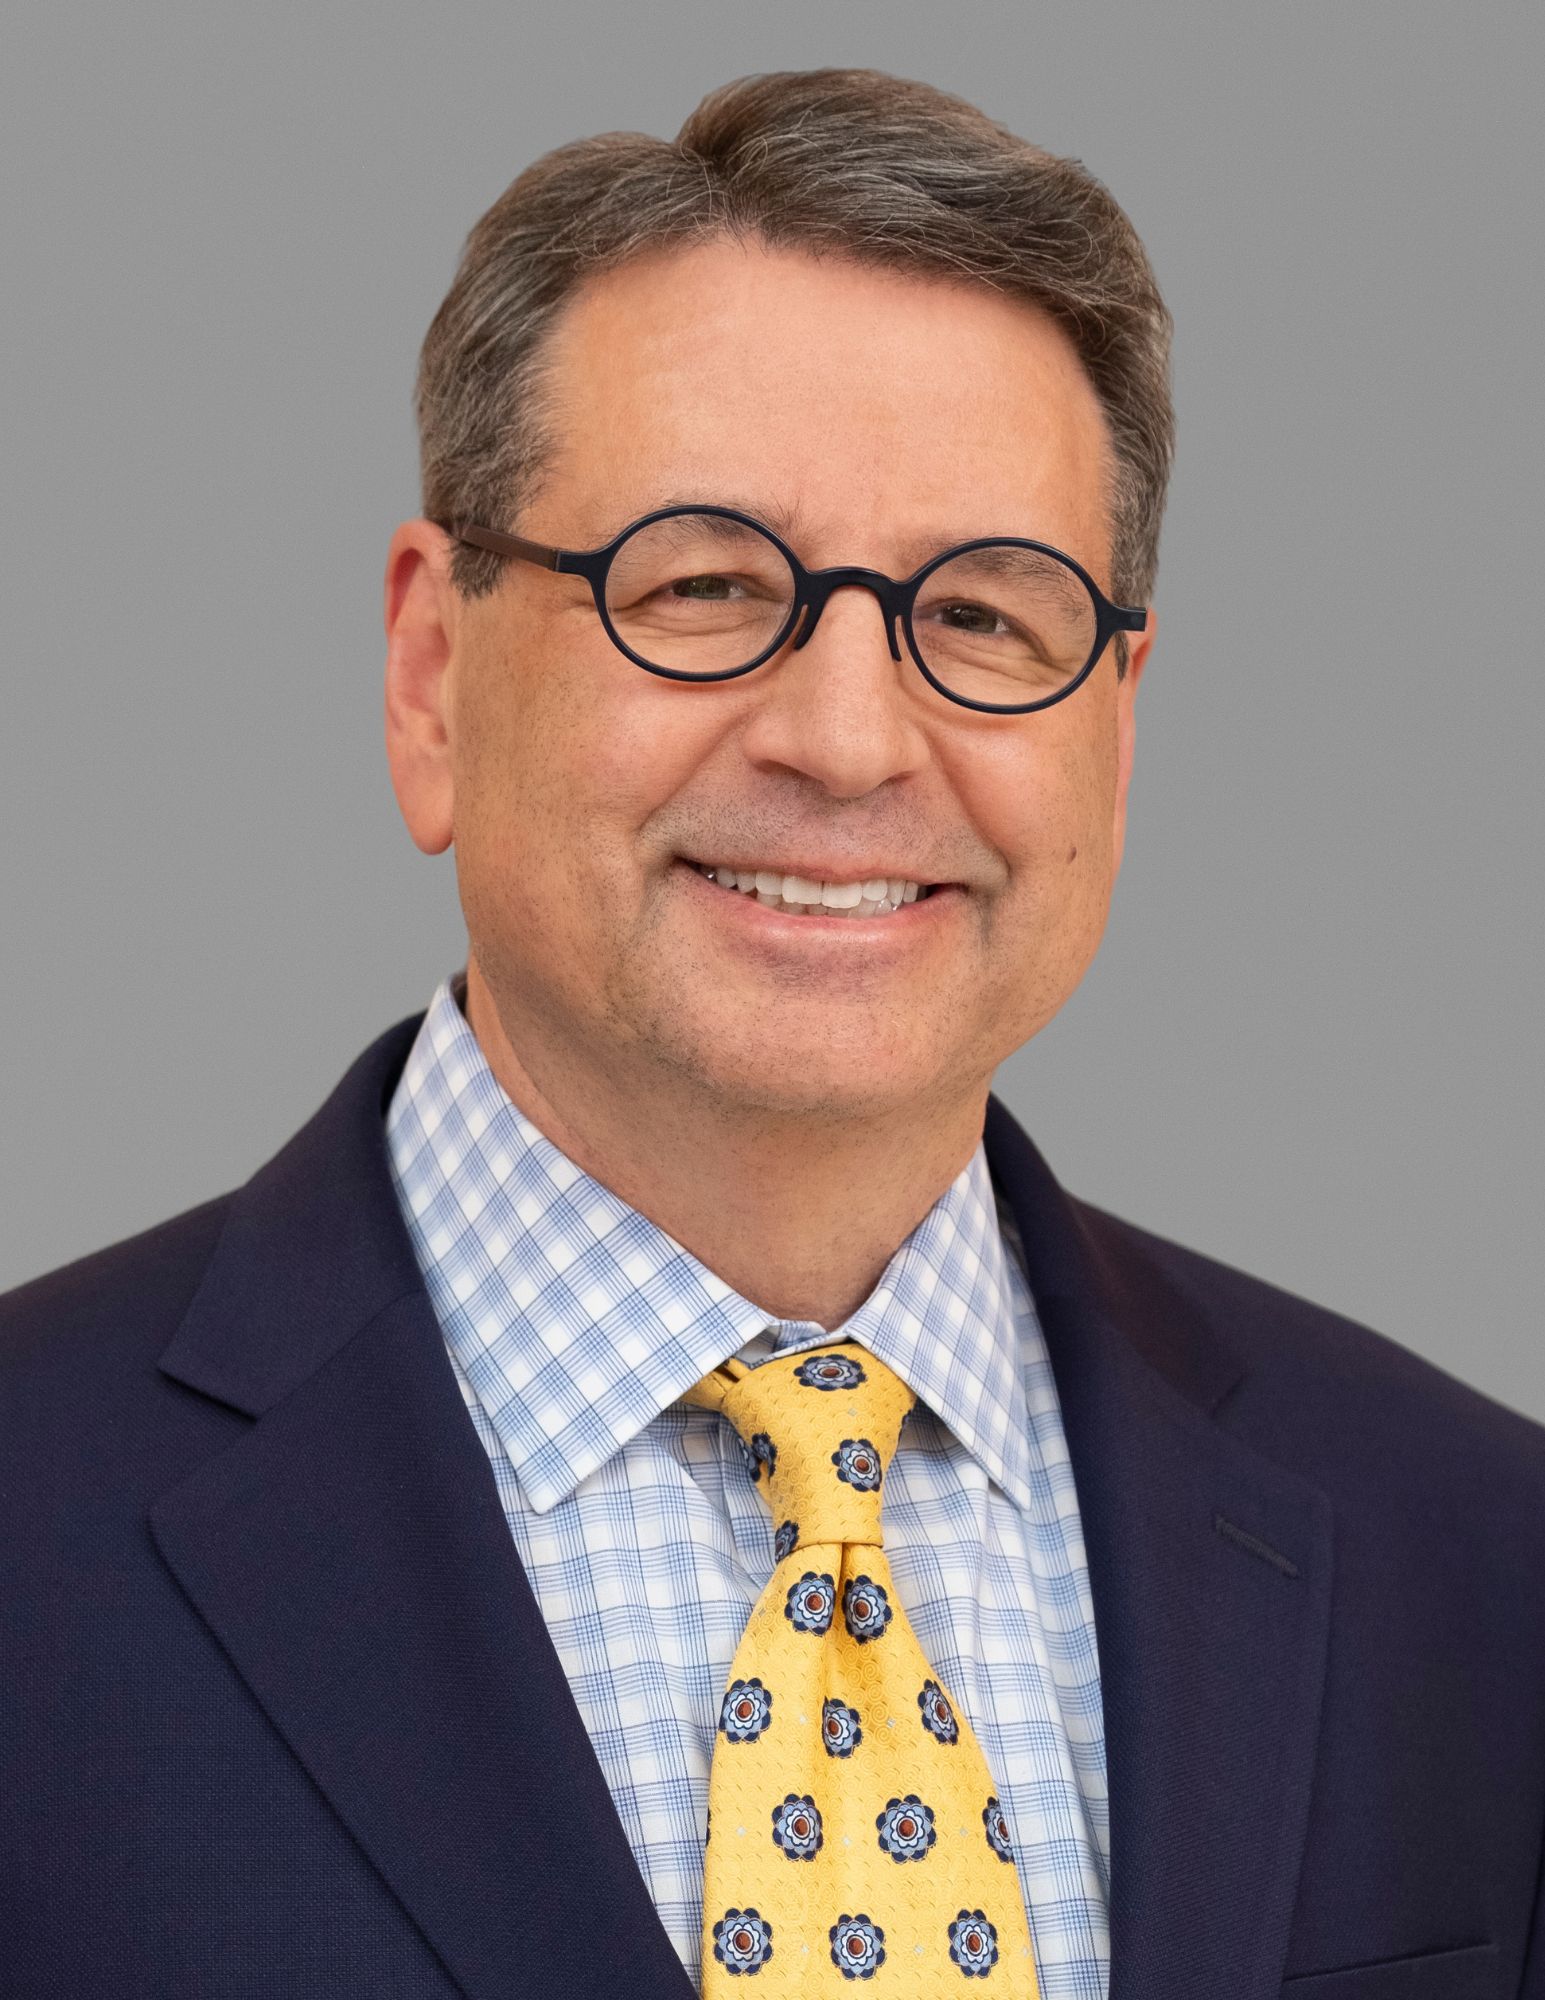 This image shows a man with short, dark hair wearing round glasses, a dark blue suit jacket, a blue and white patterned dress shirt, and a yellow patterned tie. He is smiling and is posing against a plain gray background.